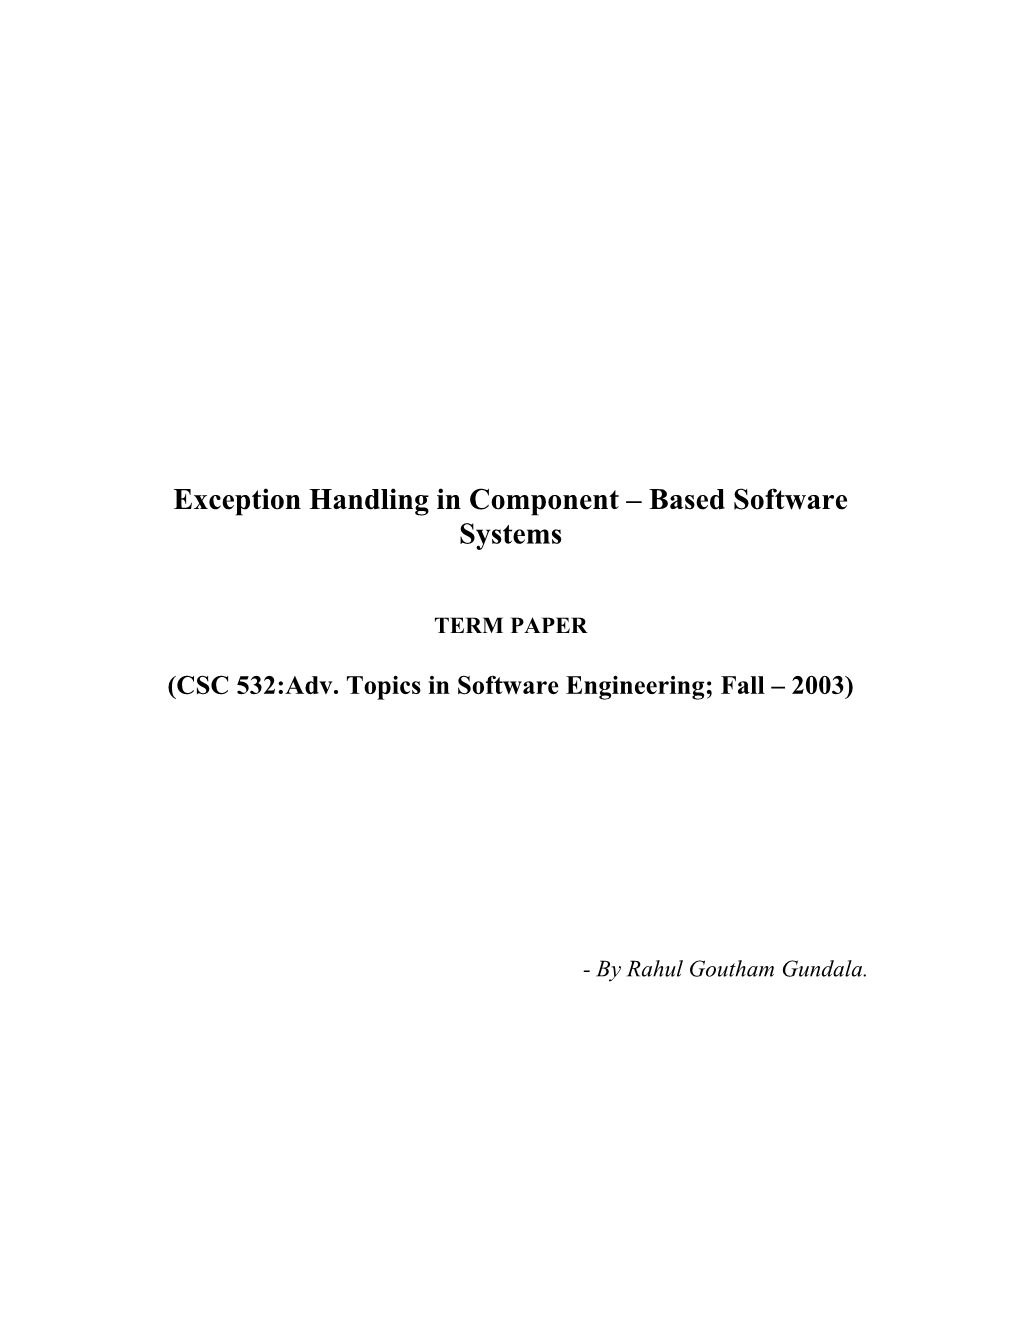 Exception Handling in Component Based Software Systems